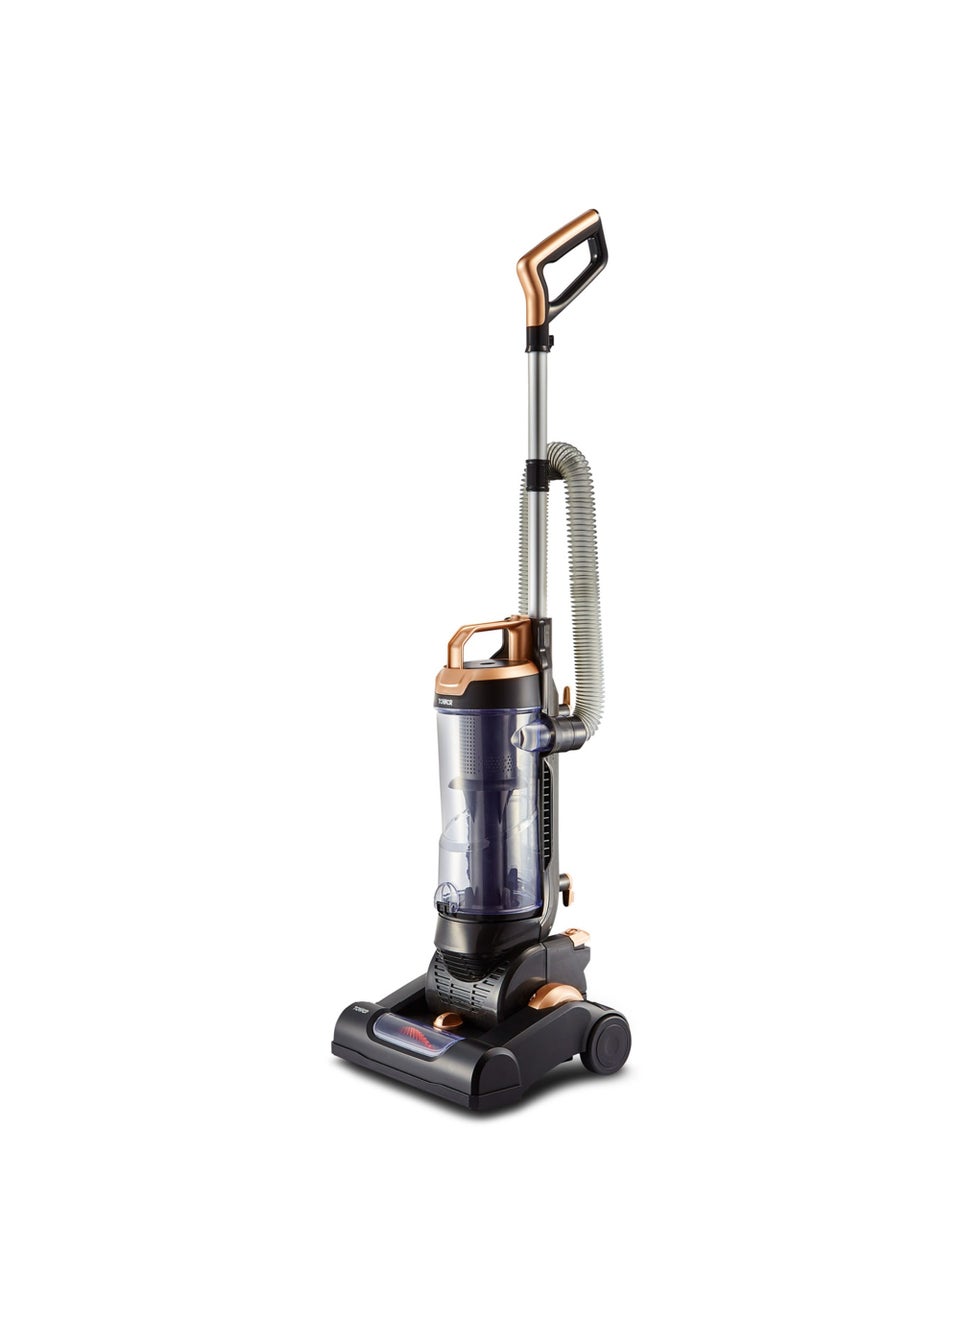 Tower RXP30PET Bagless Upright Vacuum Cleaner